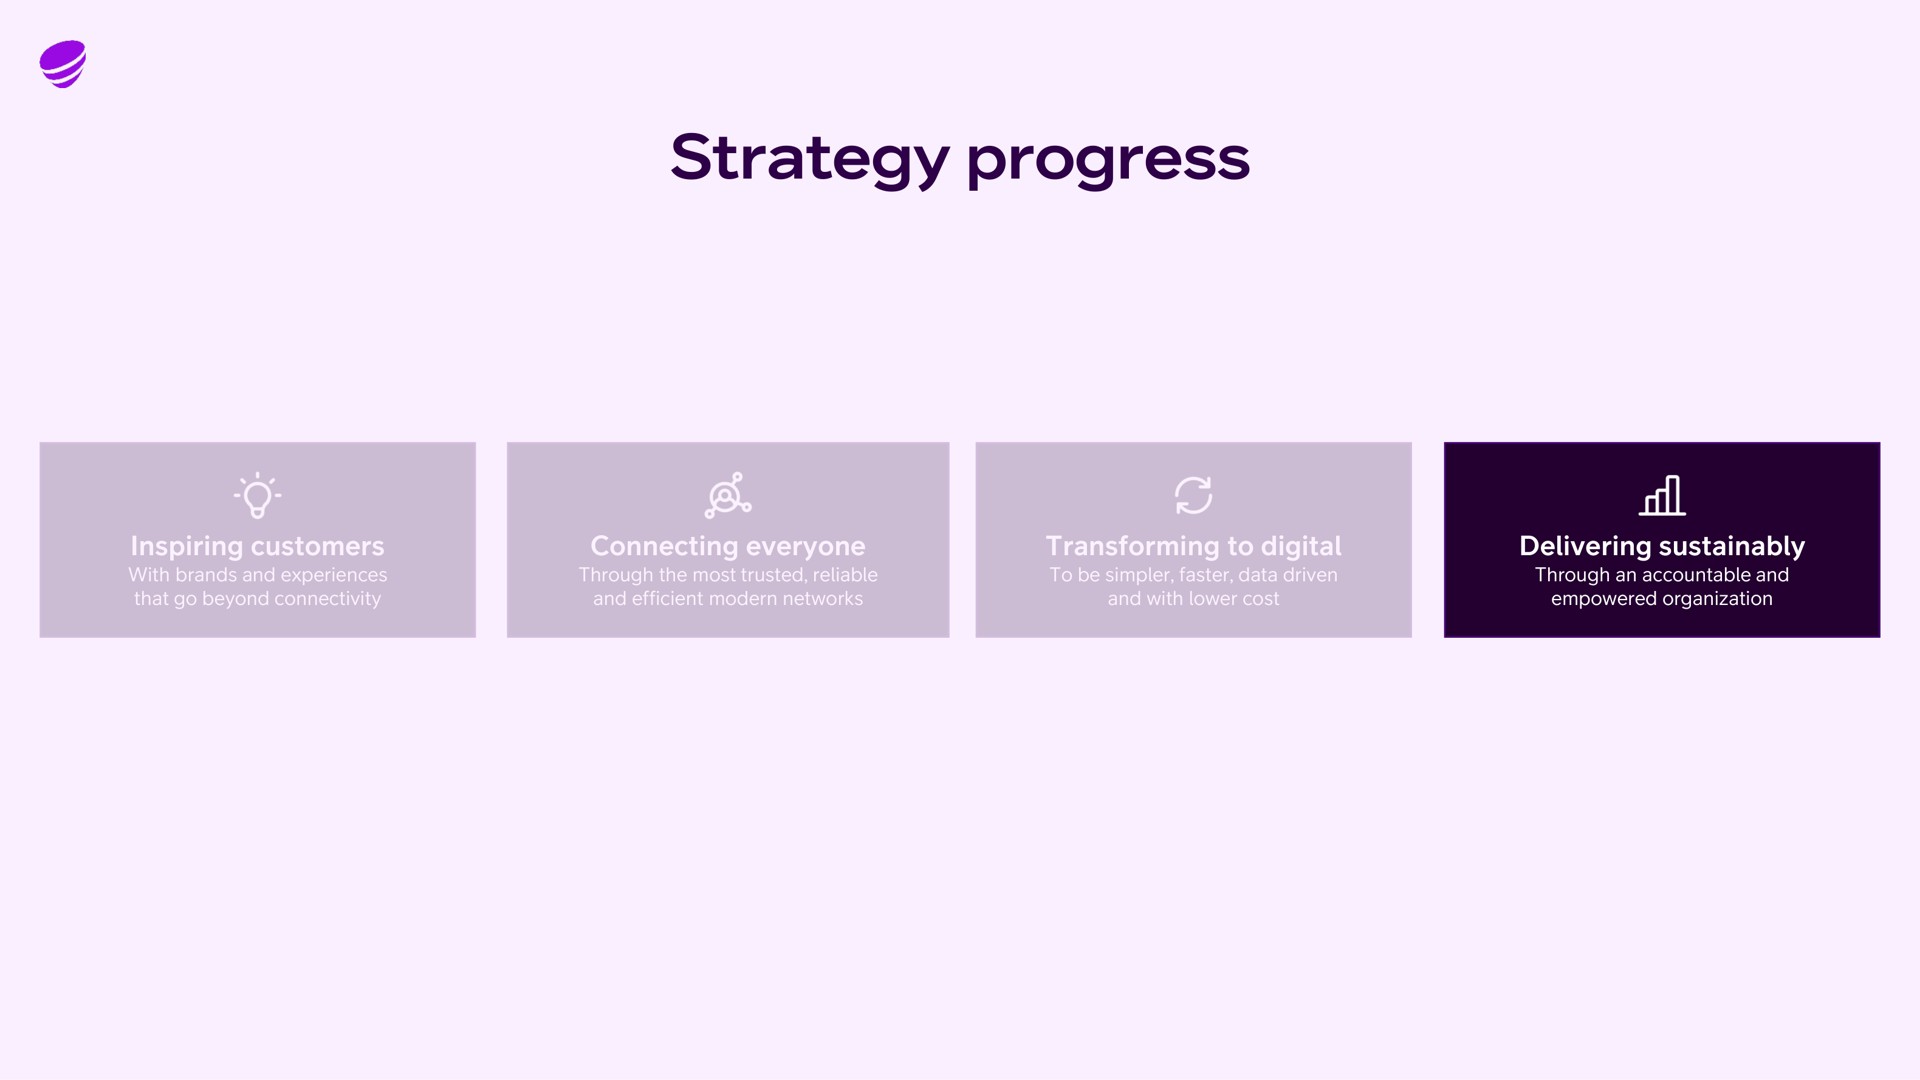 strategy progress inspiring customers connecting everyone transforming to digital delivering all | Telia Company